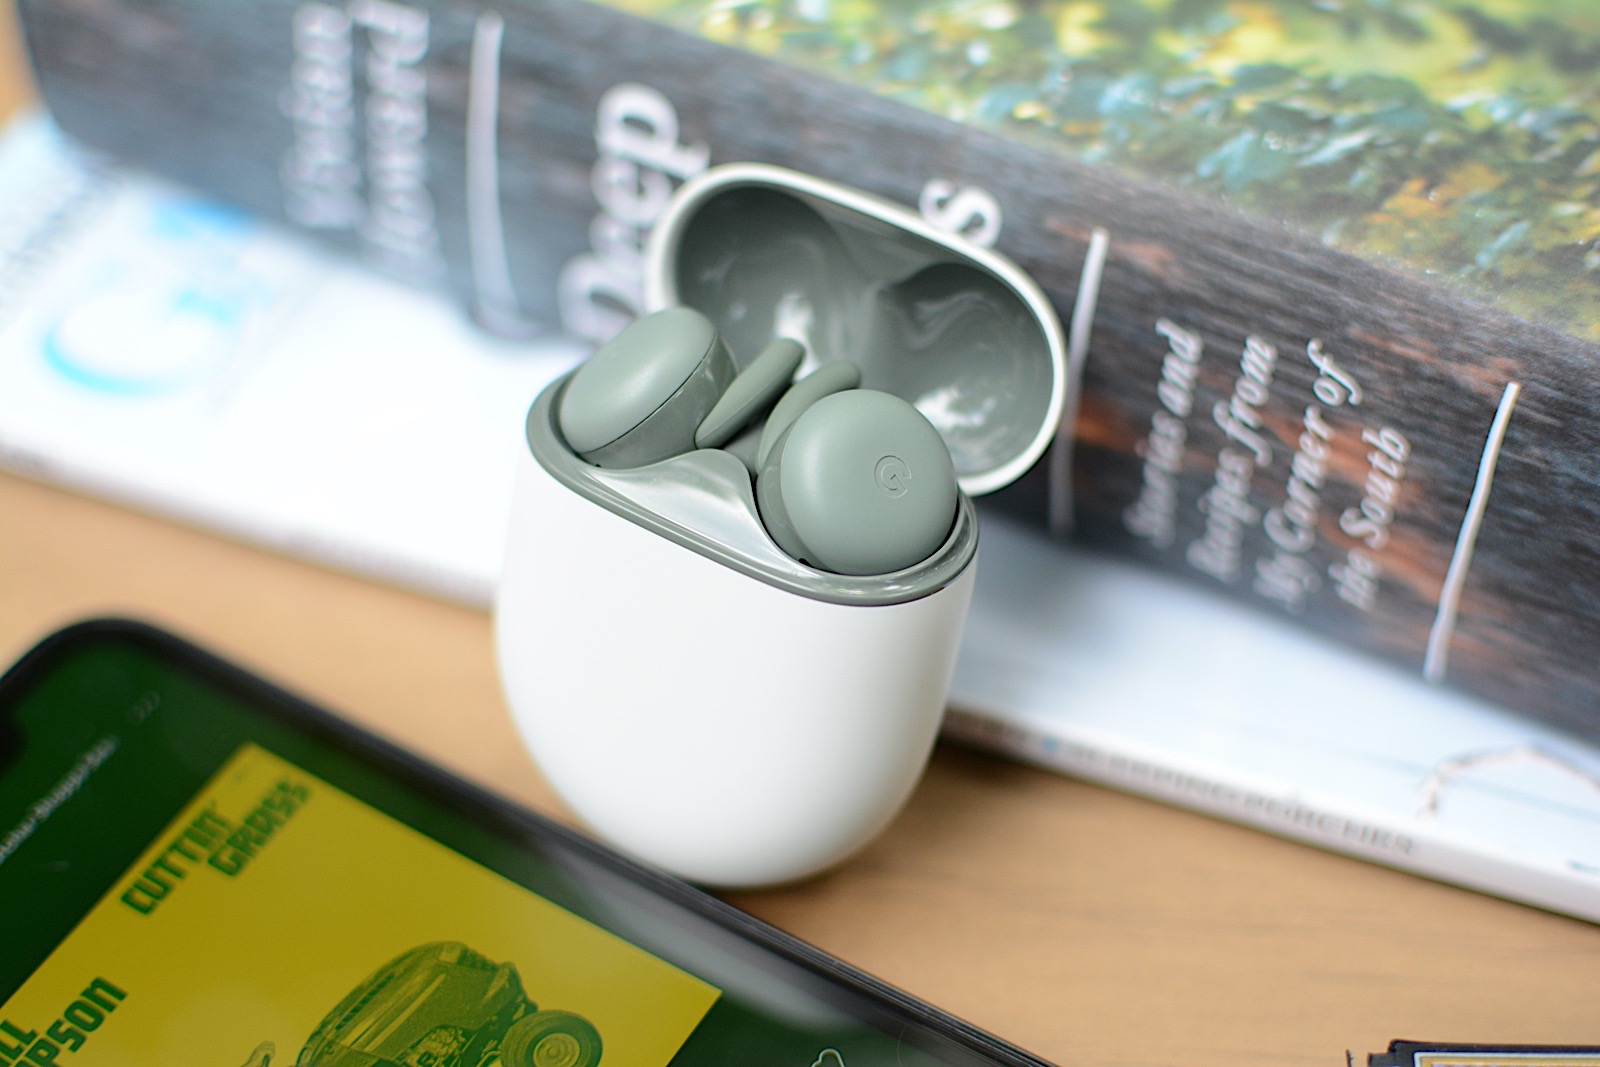 Google's $99 Pixel Buds A-Series are now available